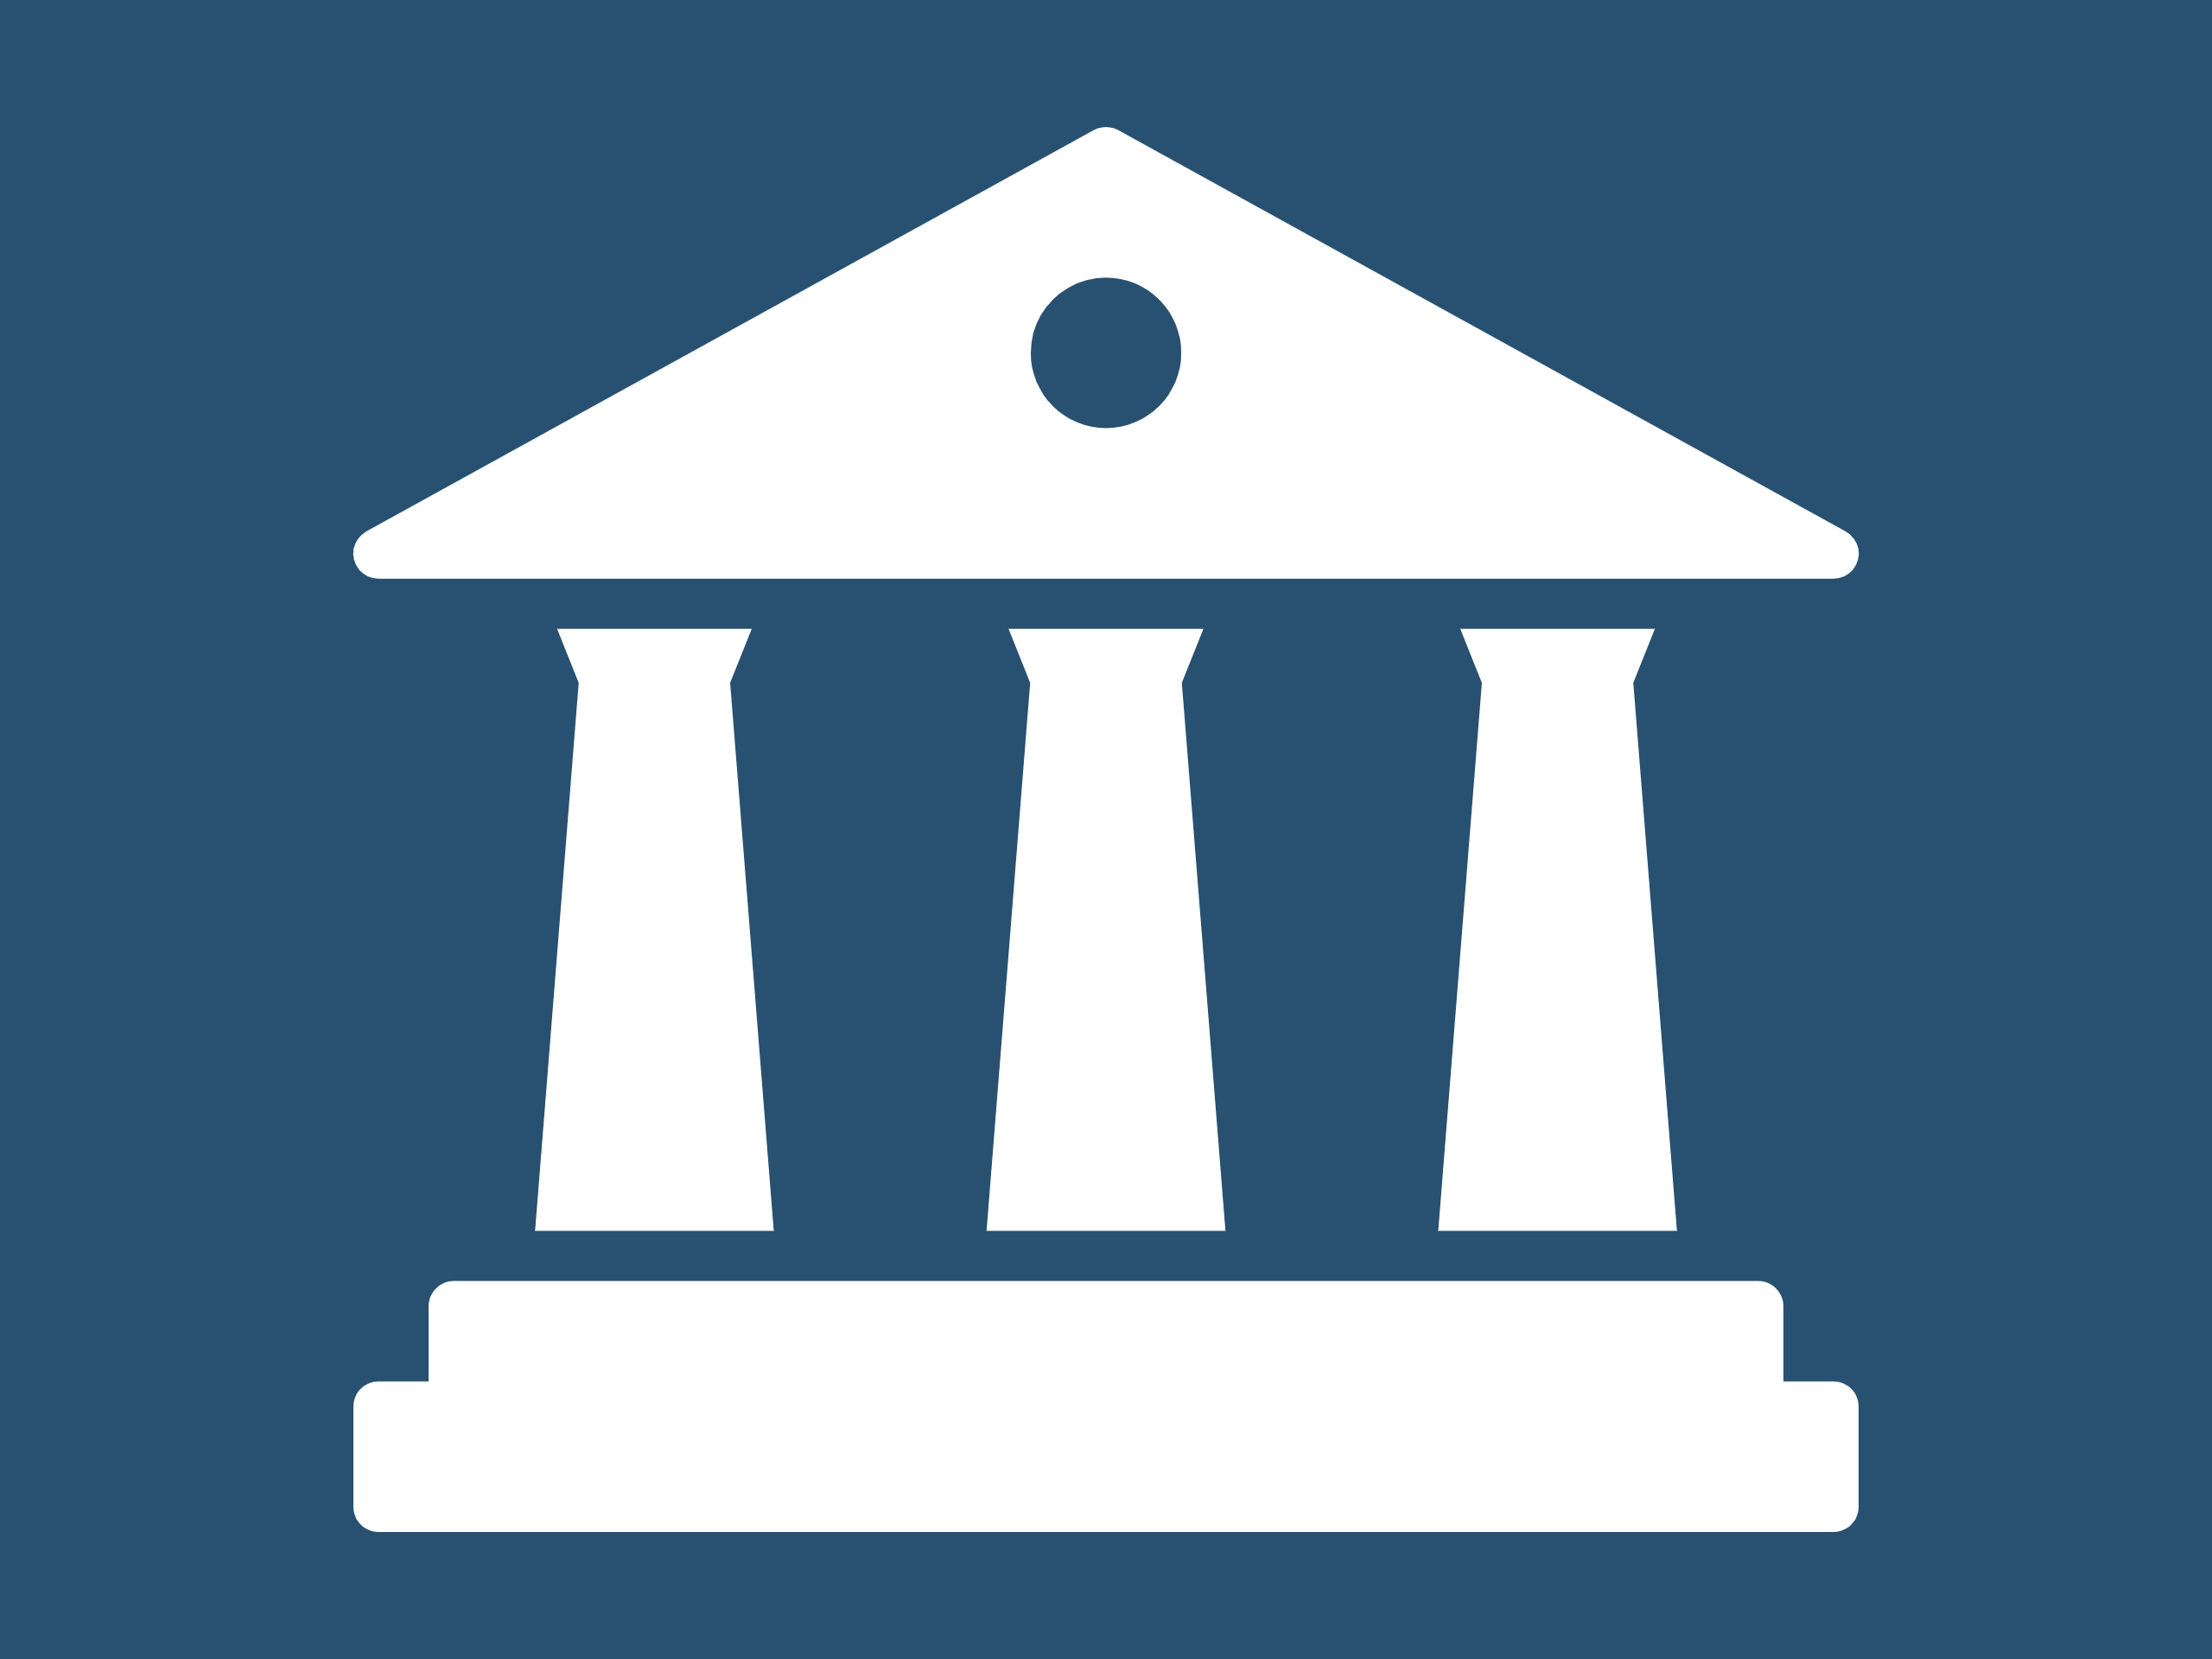 Simple Line Icon Depicting a Government Institution or Building